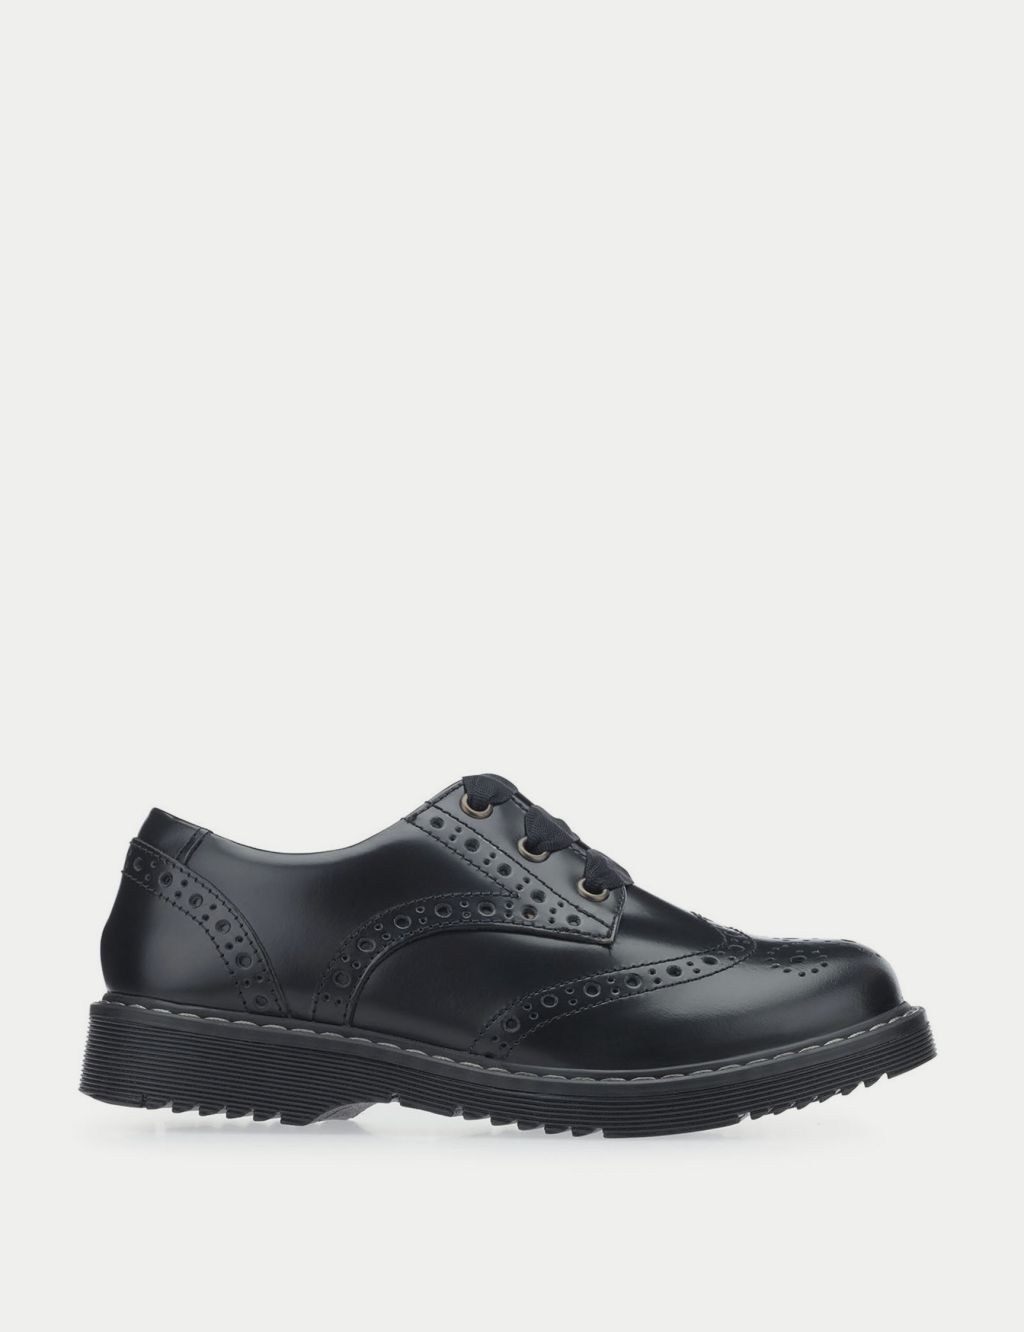 Kids' Leather Schoolwear Brogues (12.5 Small - 7 Large)